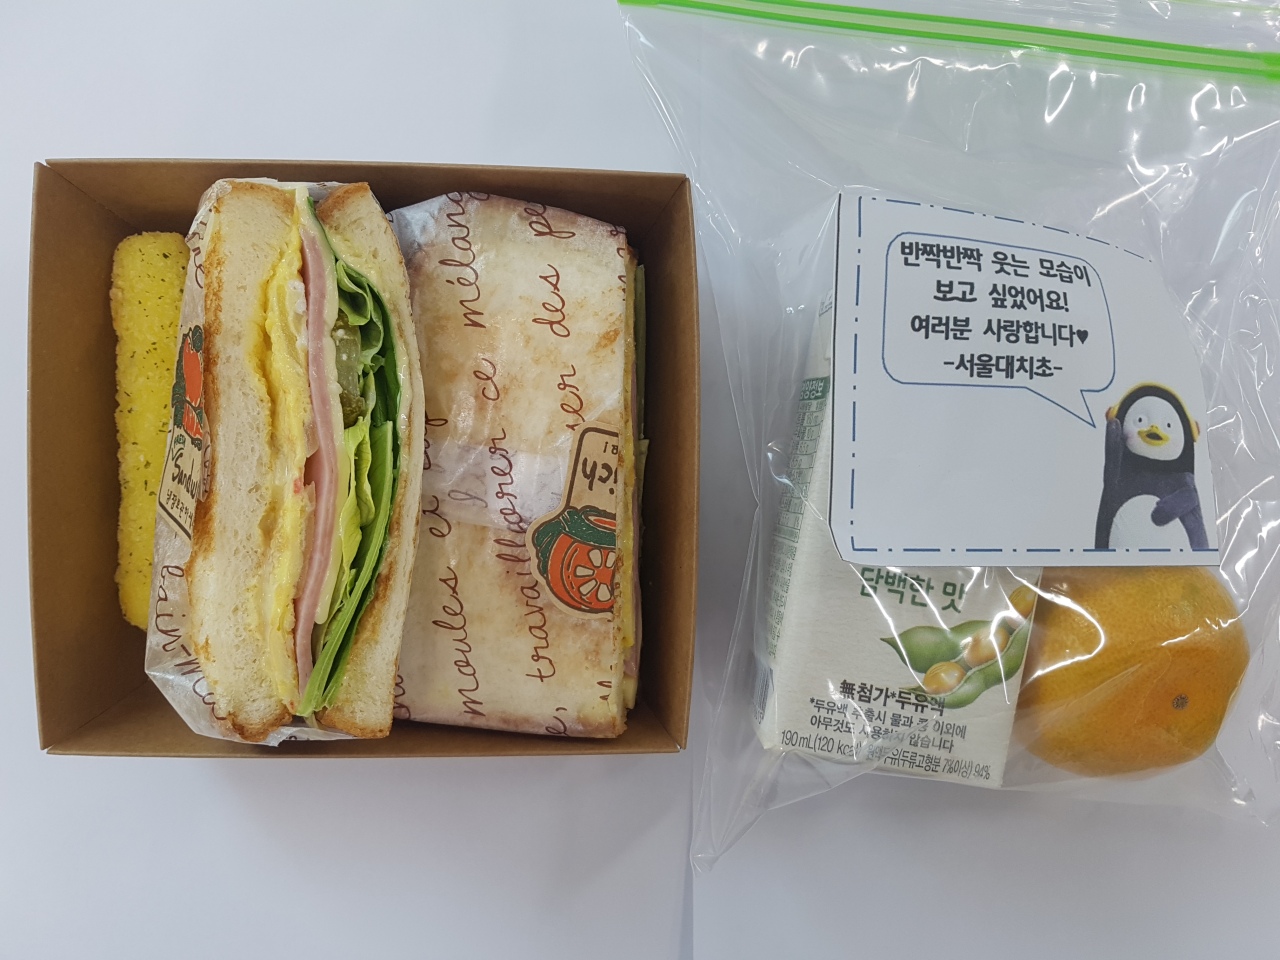 Convenience food is given to students in an elementary school in Seoul. (Daechi Elementary School)